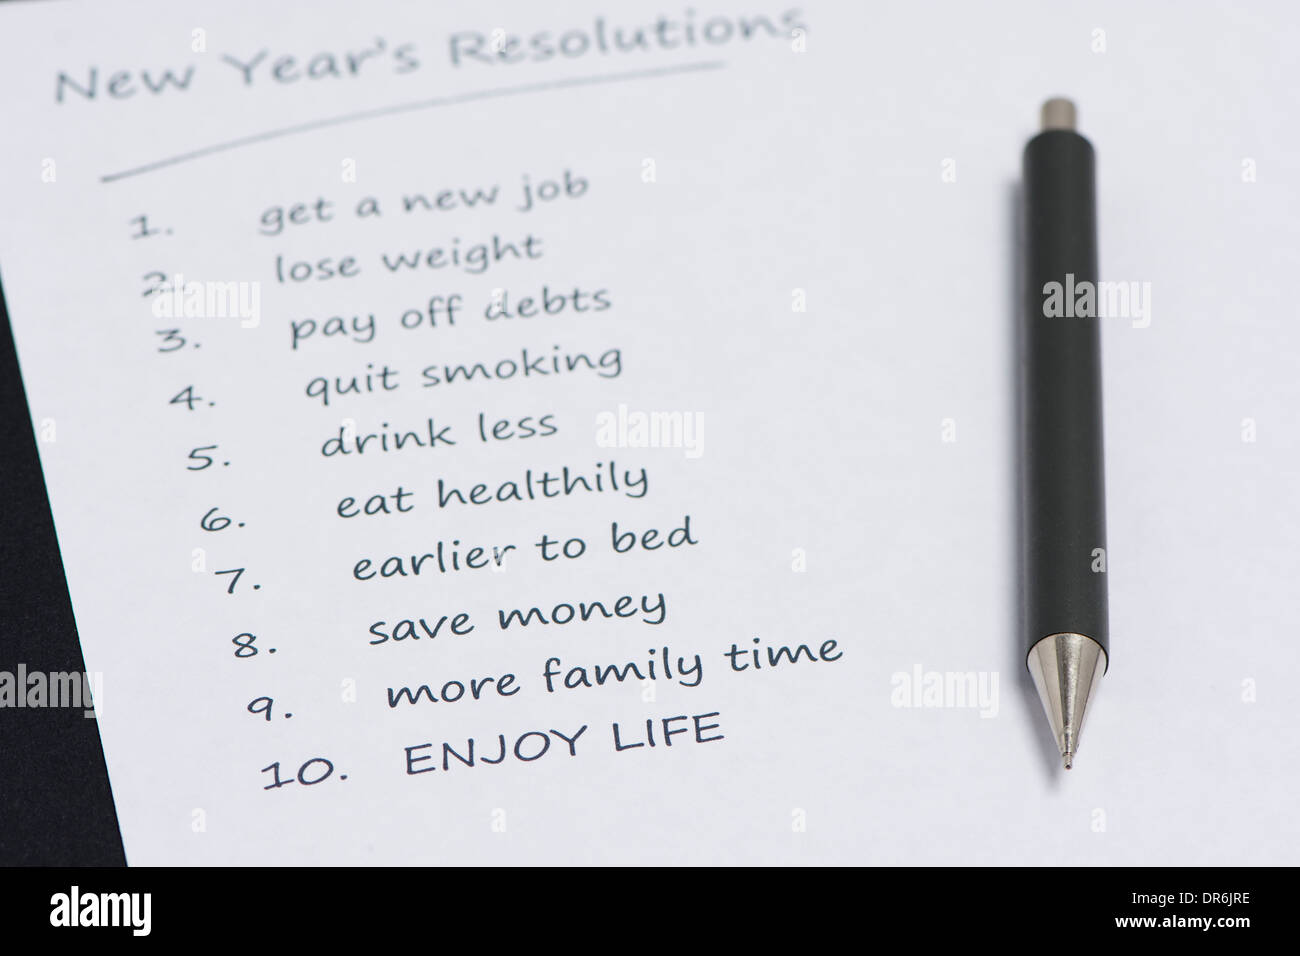 New Year's Resolution Written On A Piece Of Paper With A Pen Stock Photo